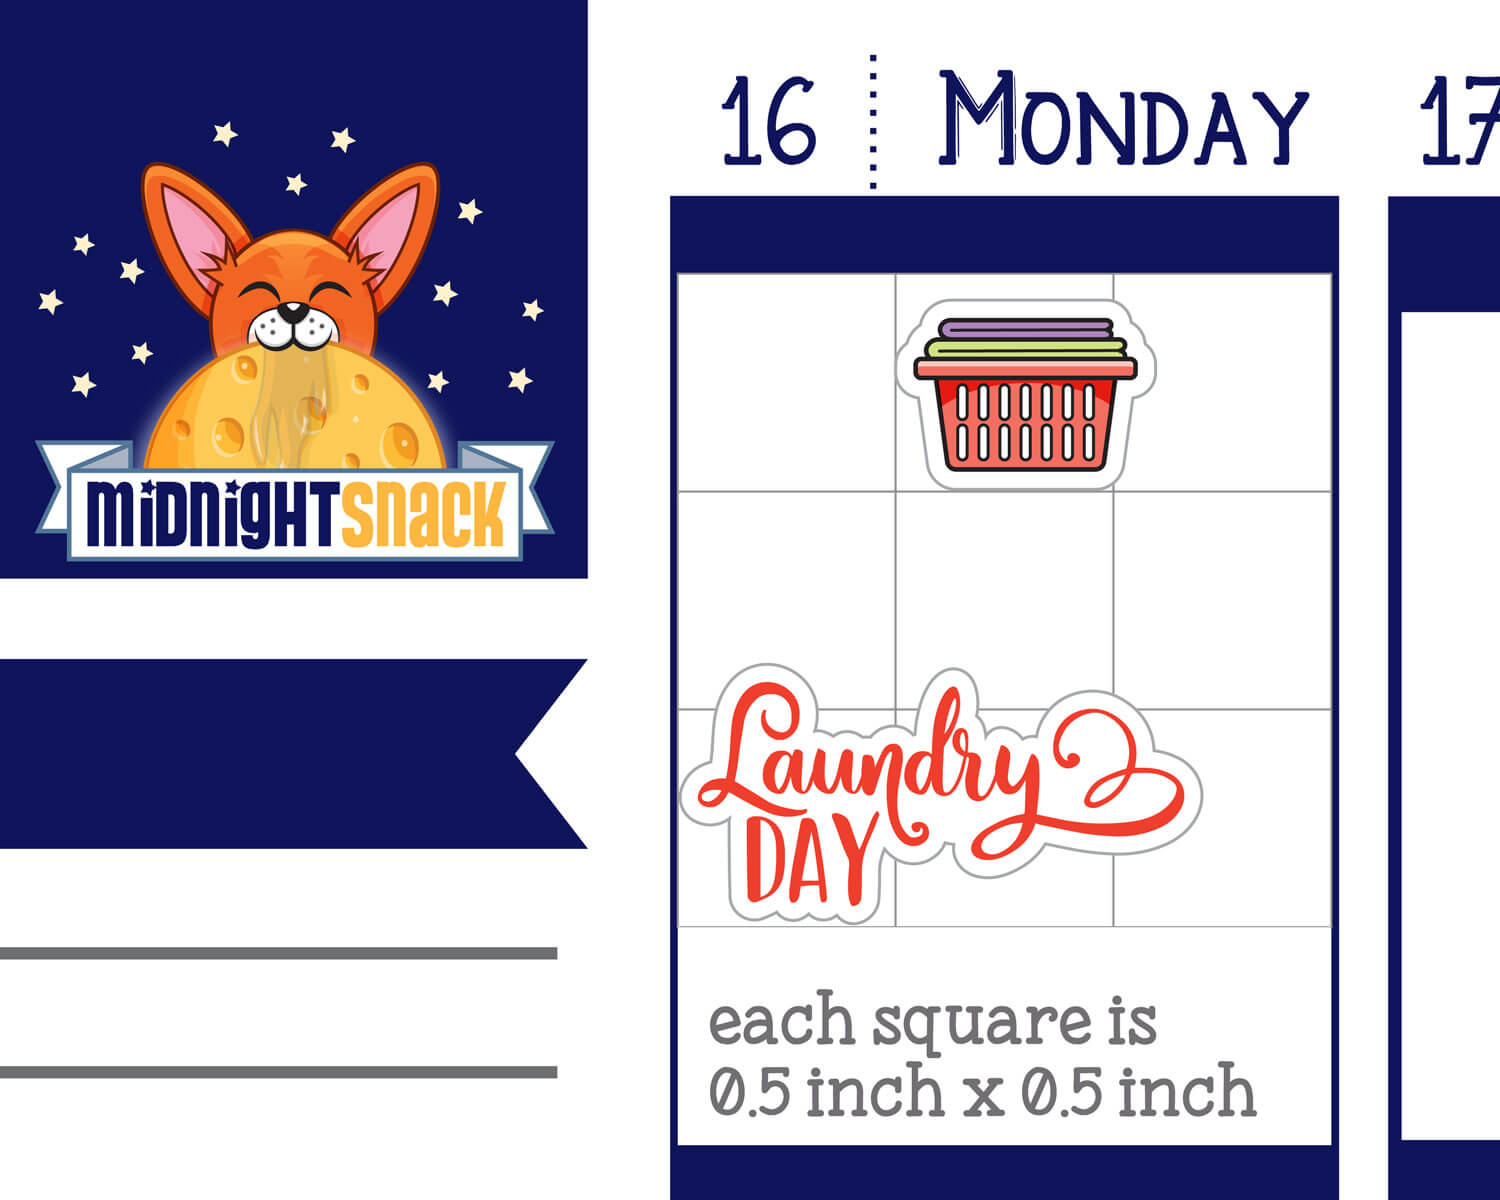 Laundry Day Sampler Planner Stickers from Midnight Snack Planner